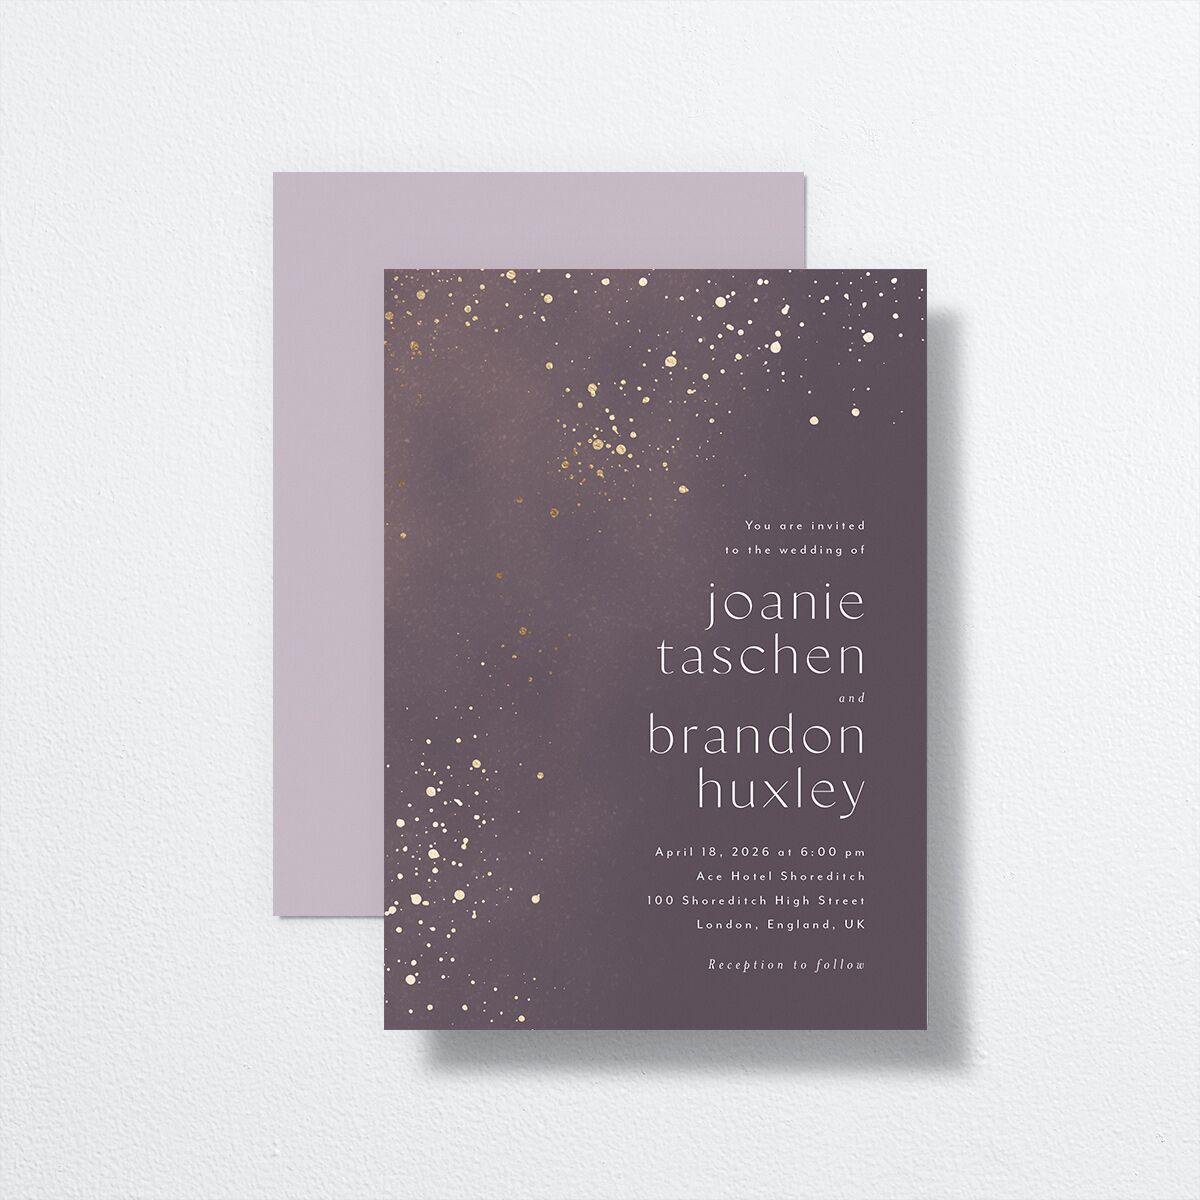 Shimmer Dust Wedding Invitations front-and-back in purple